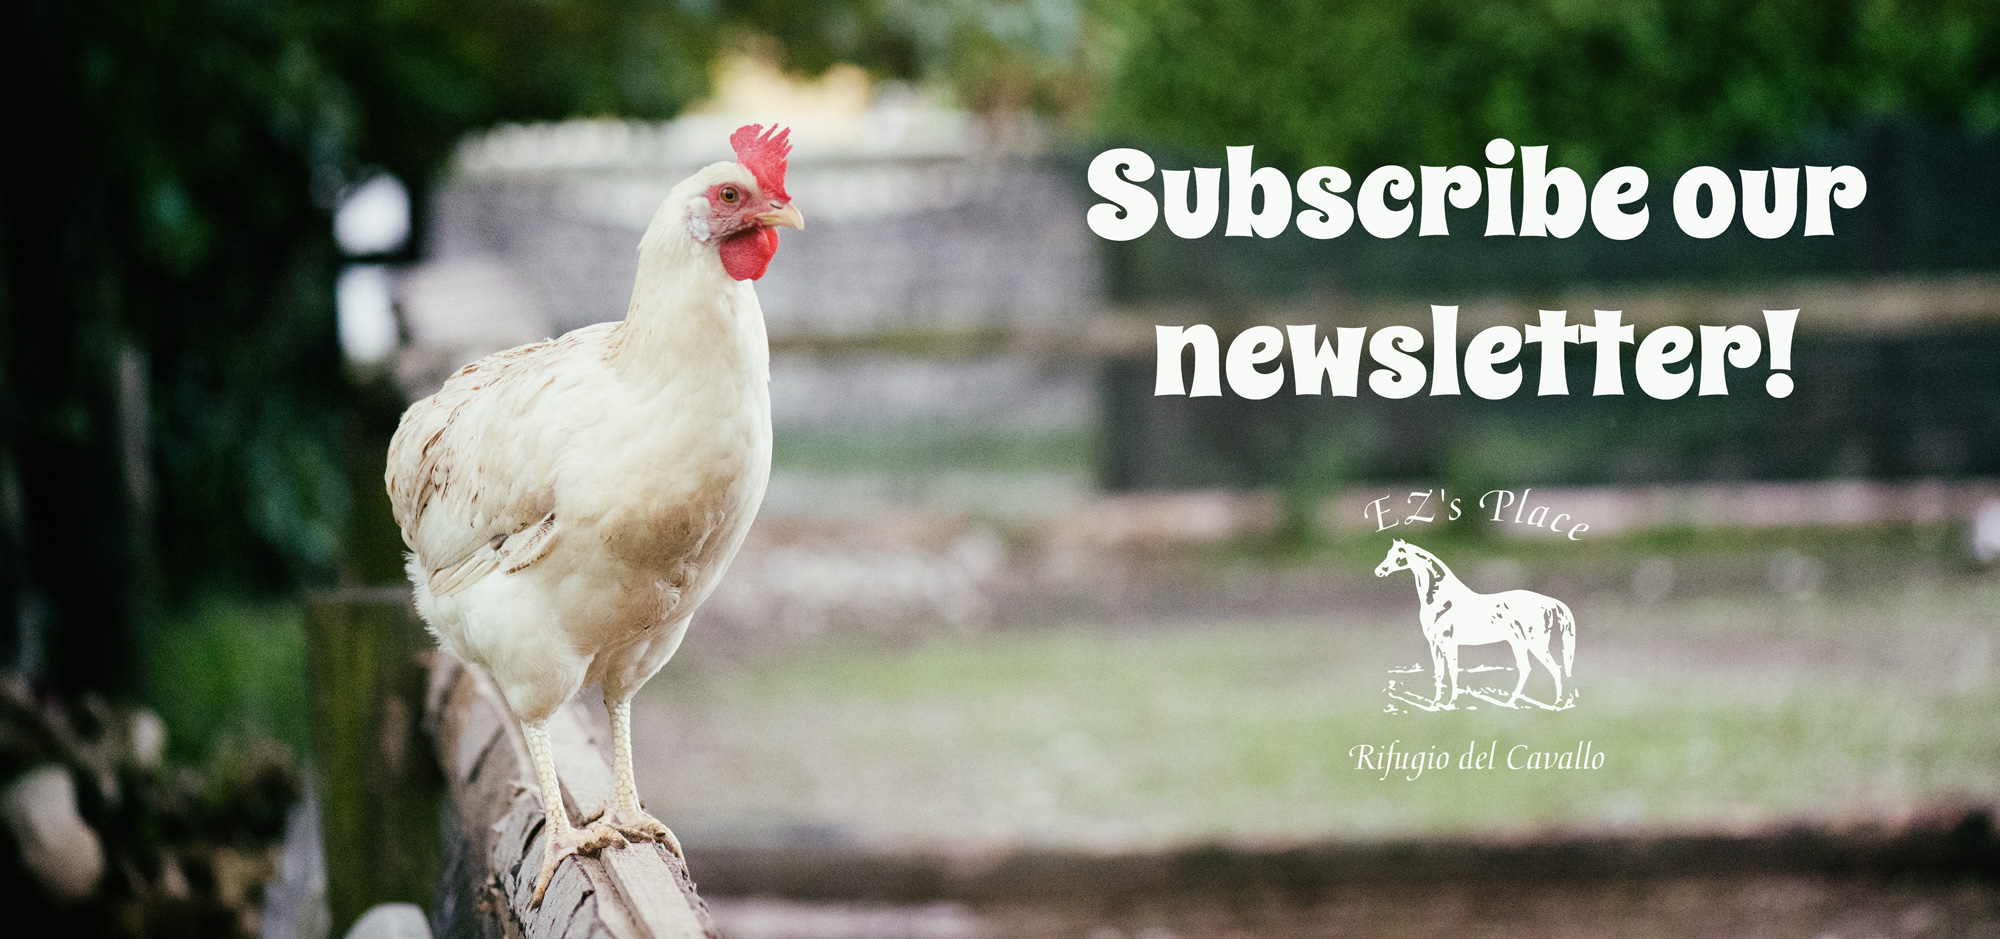 Subscribe our newsletter